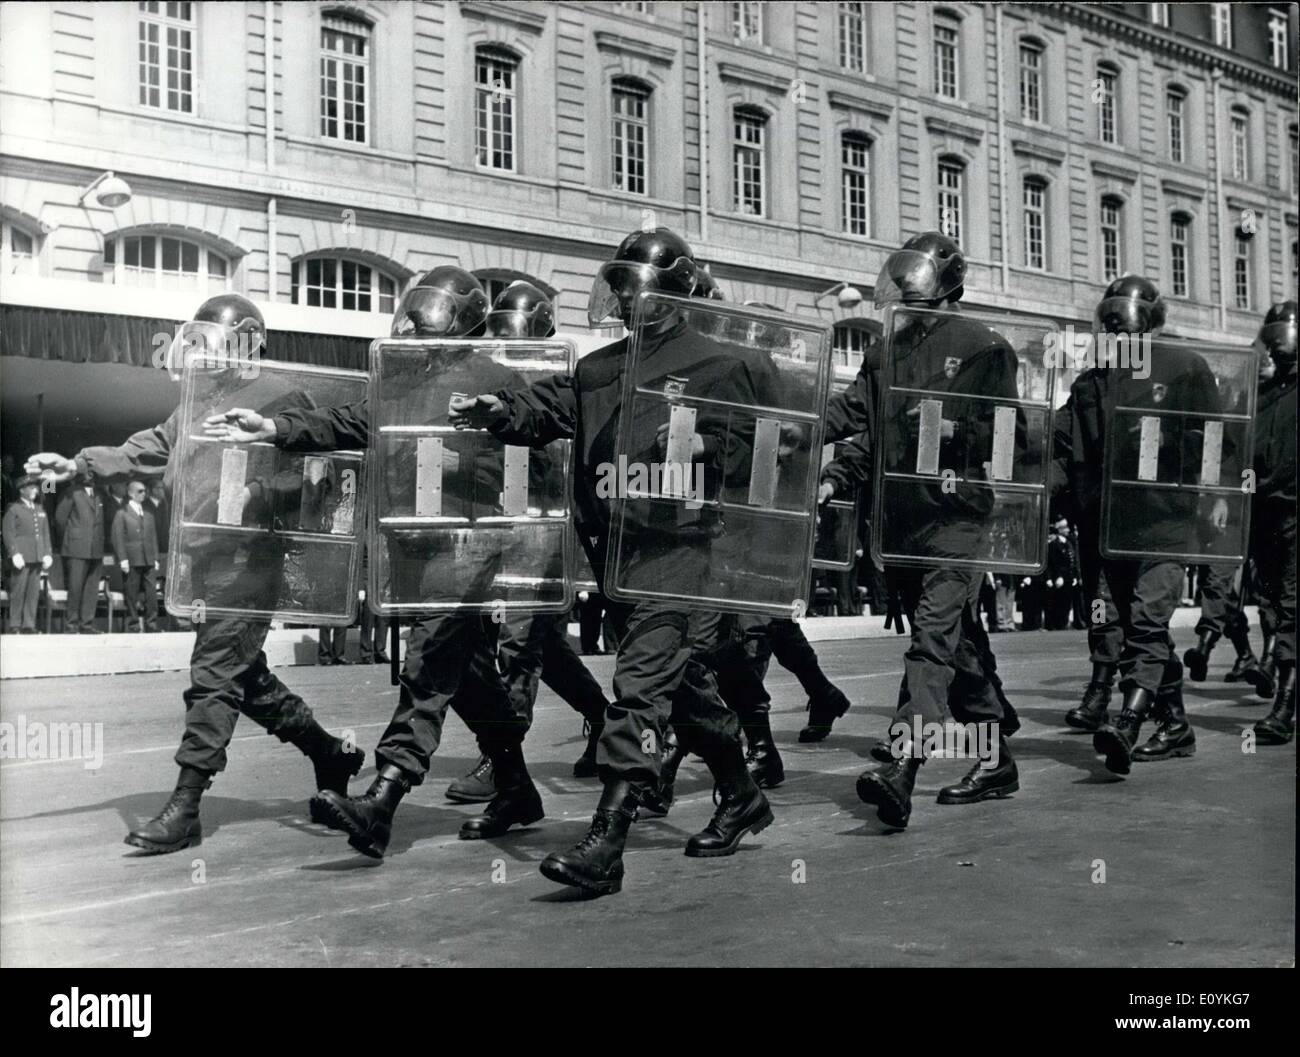 Aug. 19, 1970 - Paris Police Officers Celebrate Anniversary of ...